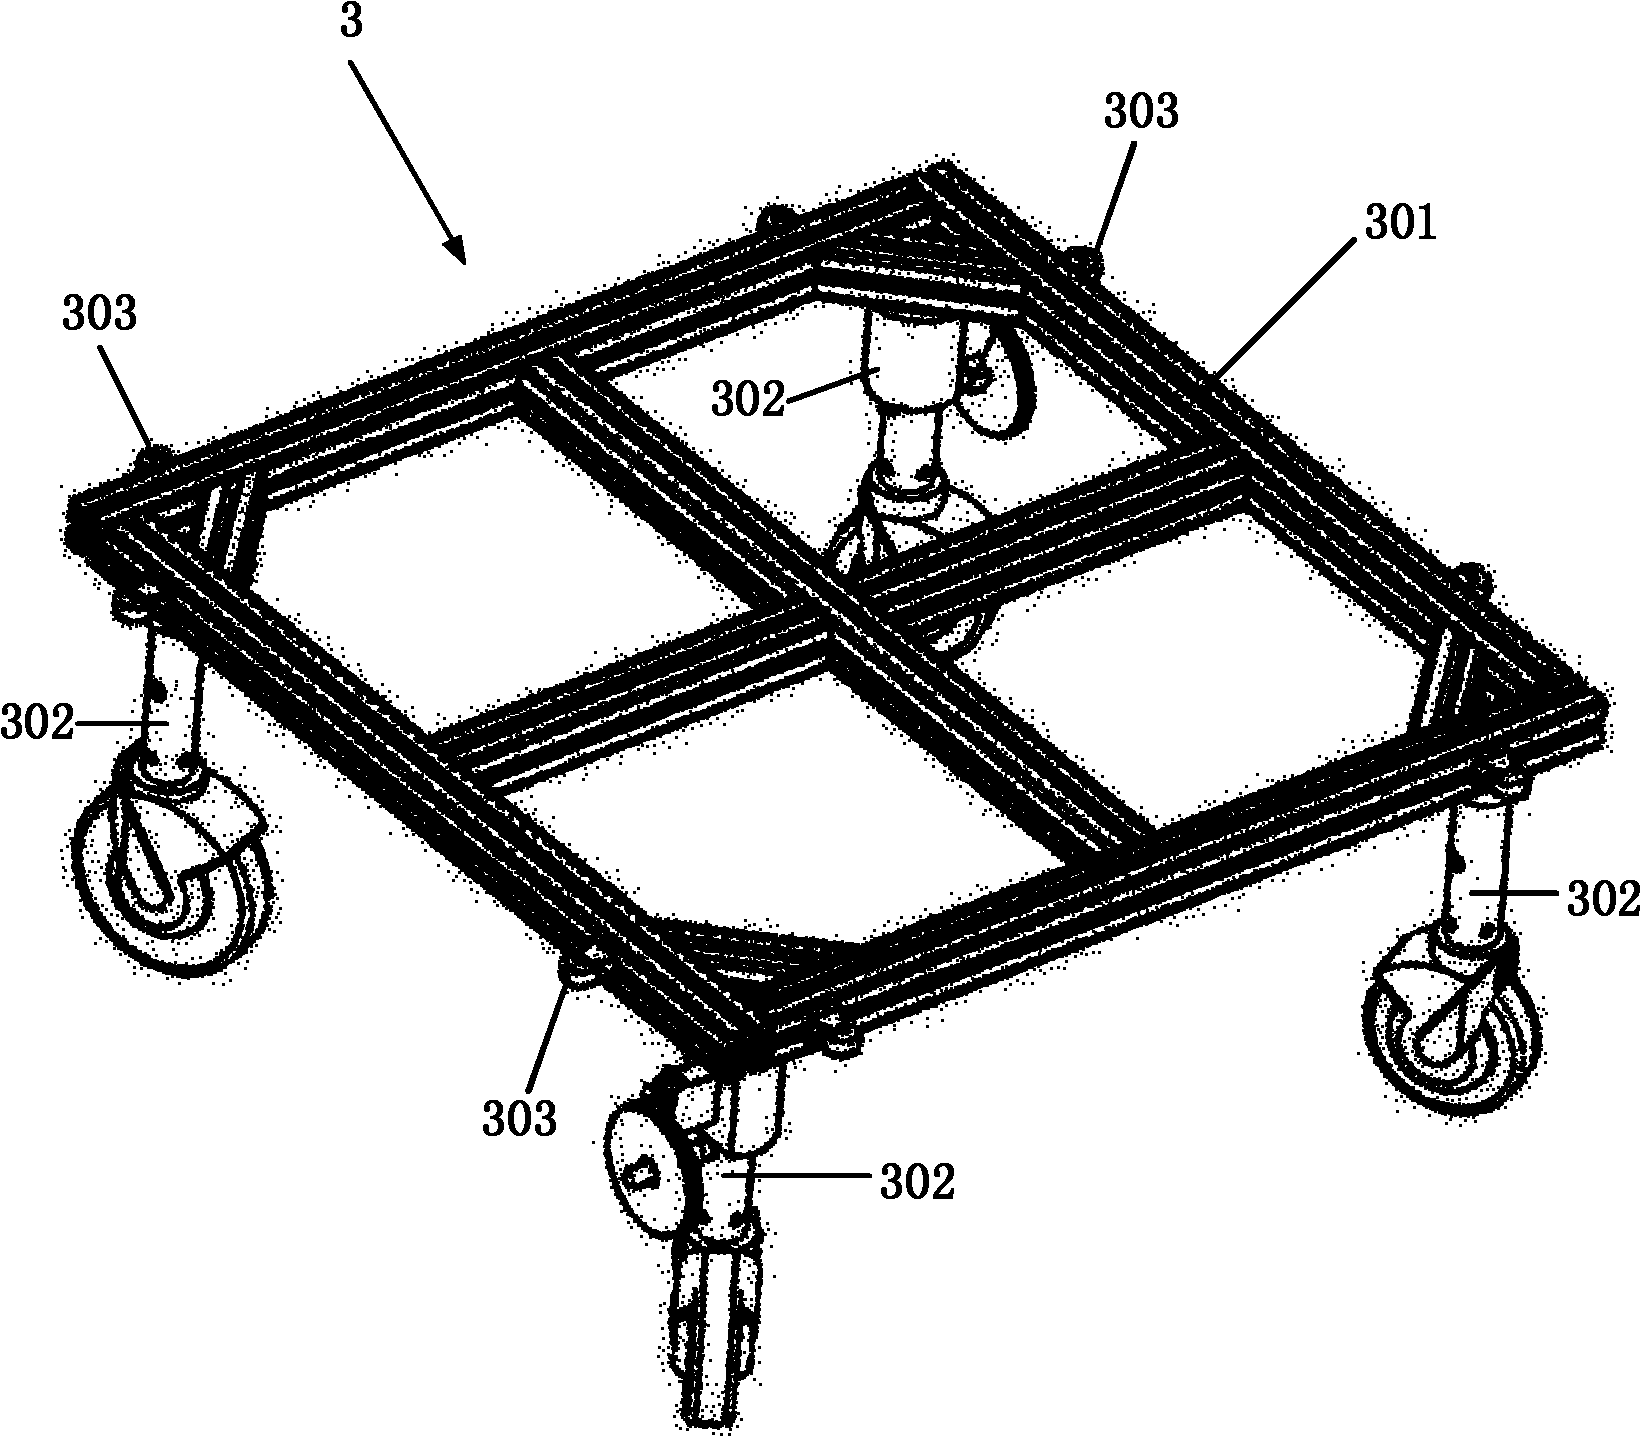 Omnidirectional mobile device for electric wheelchair